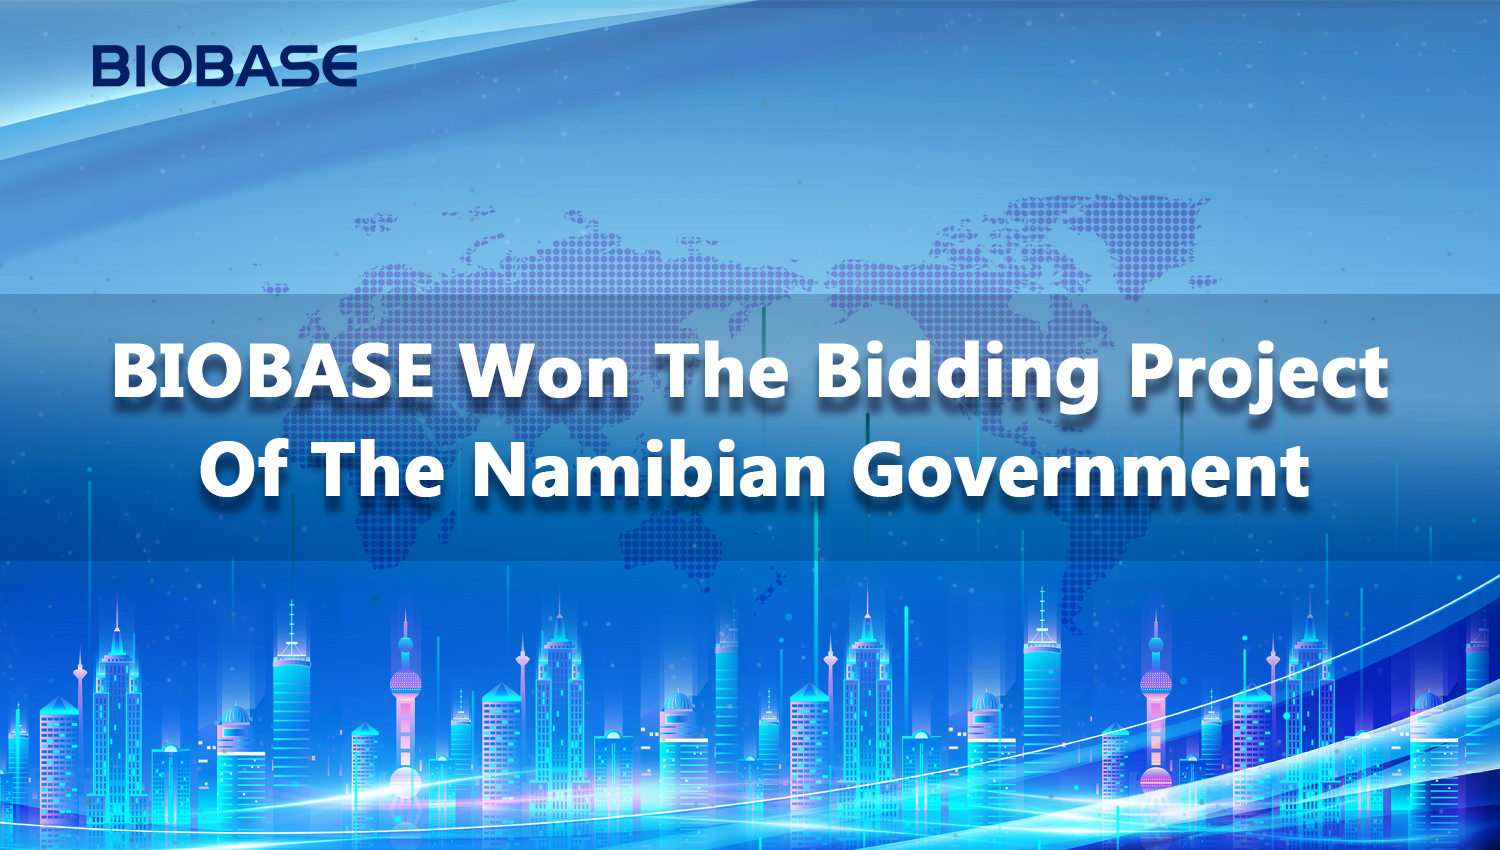 BIOBASE won the bidding project of the Namibian government